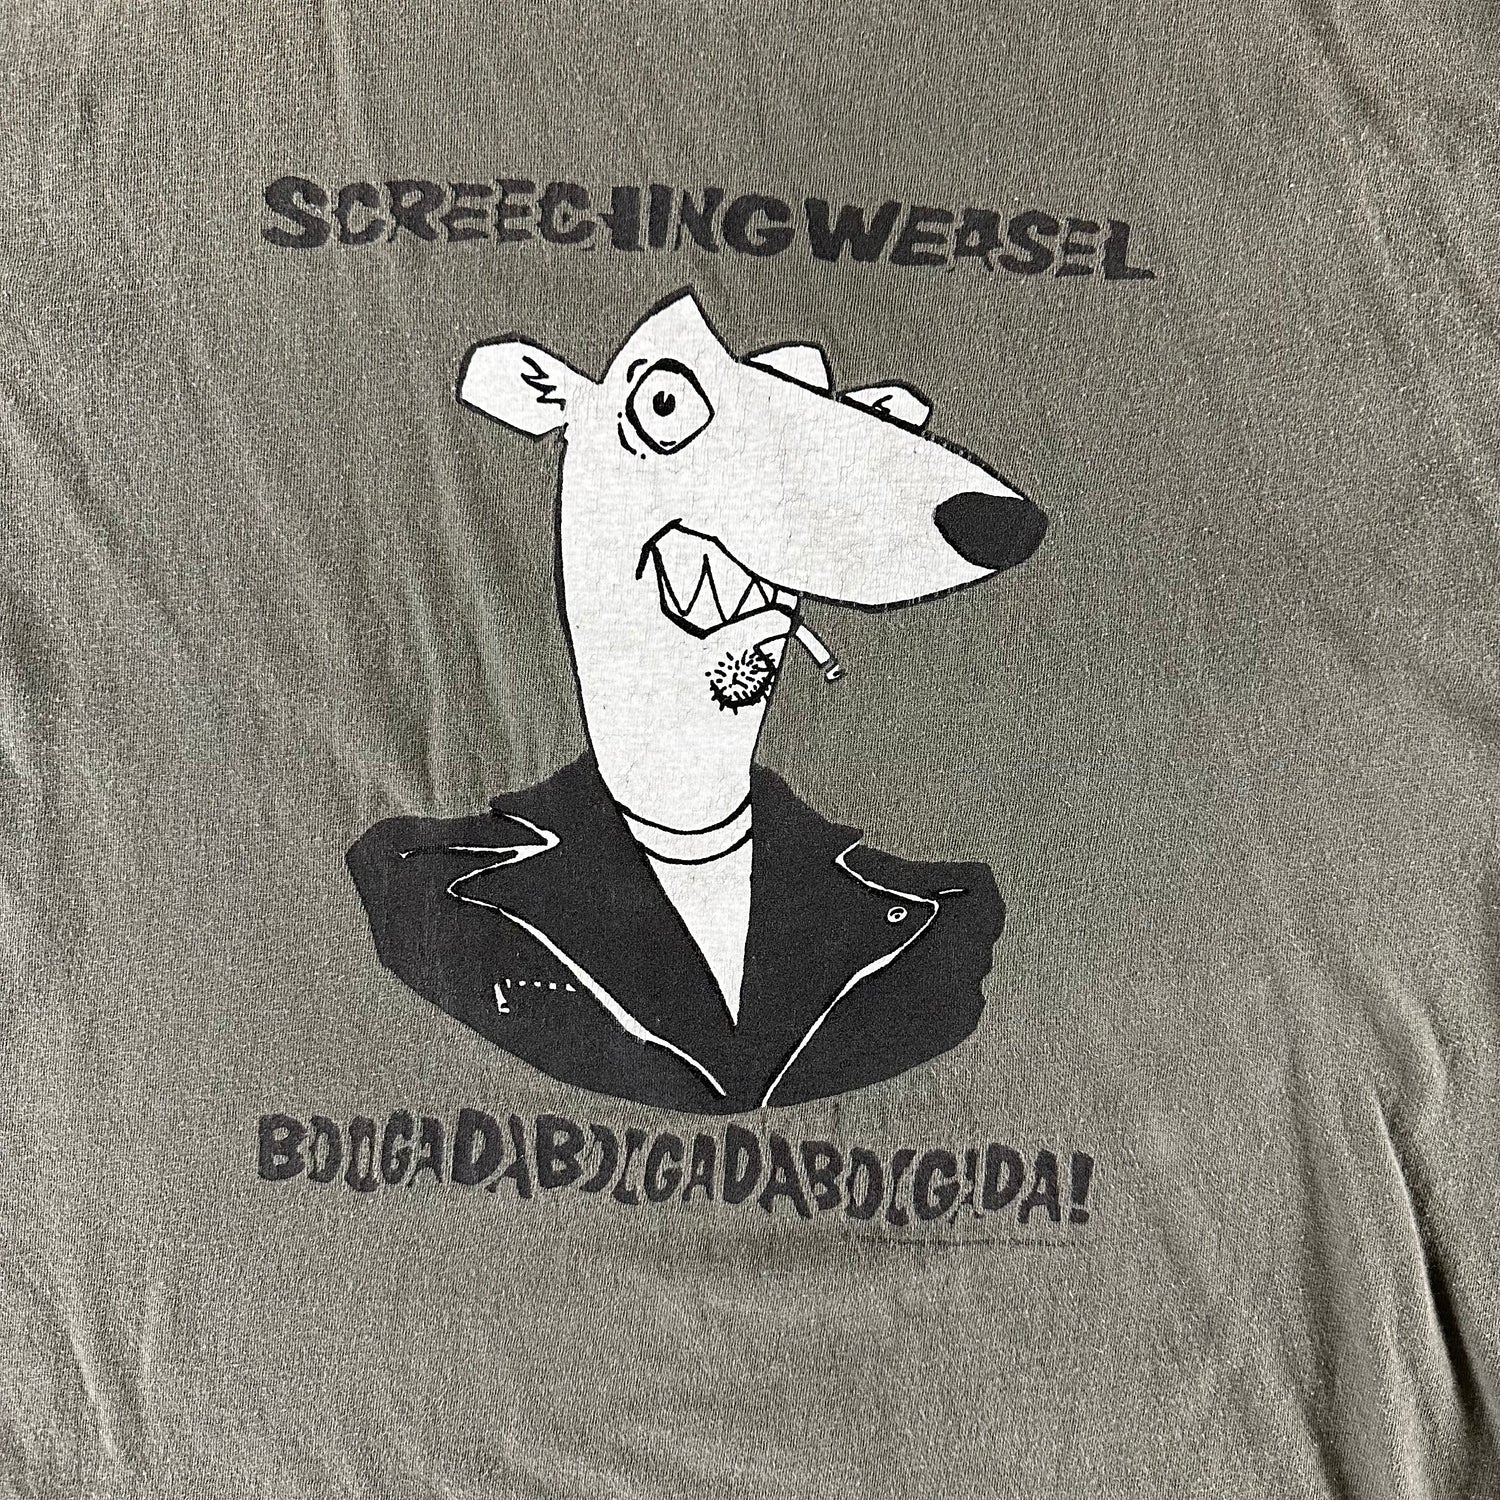 Vintage 1990s Screeching Weasel T-shirt size XL